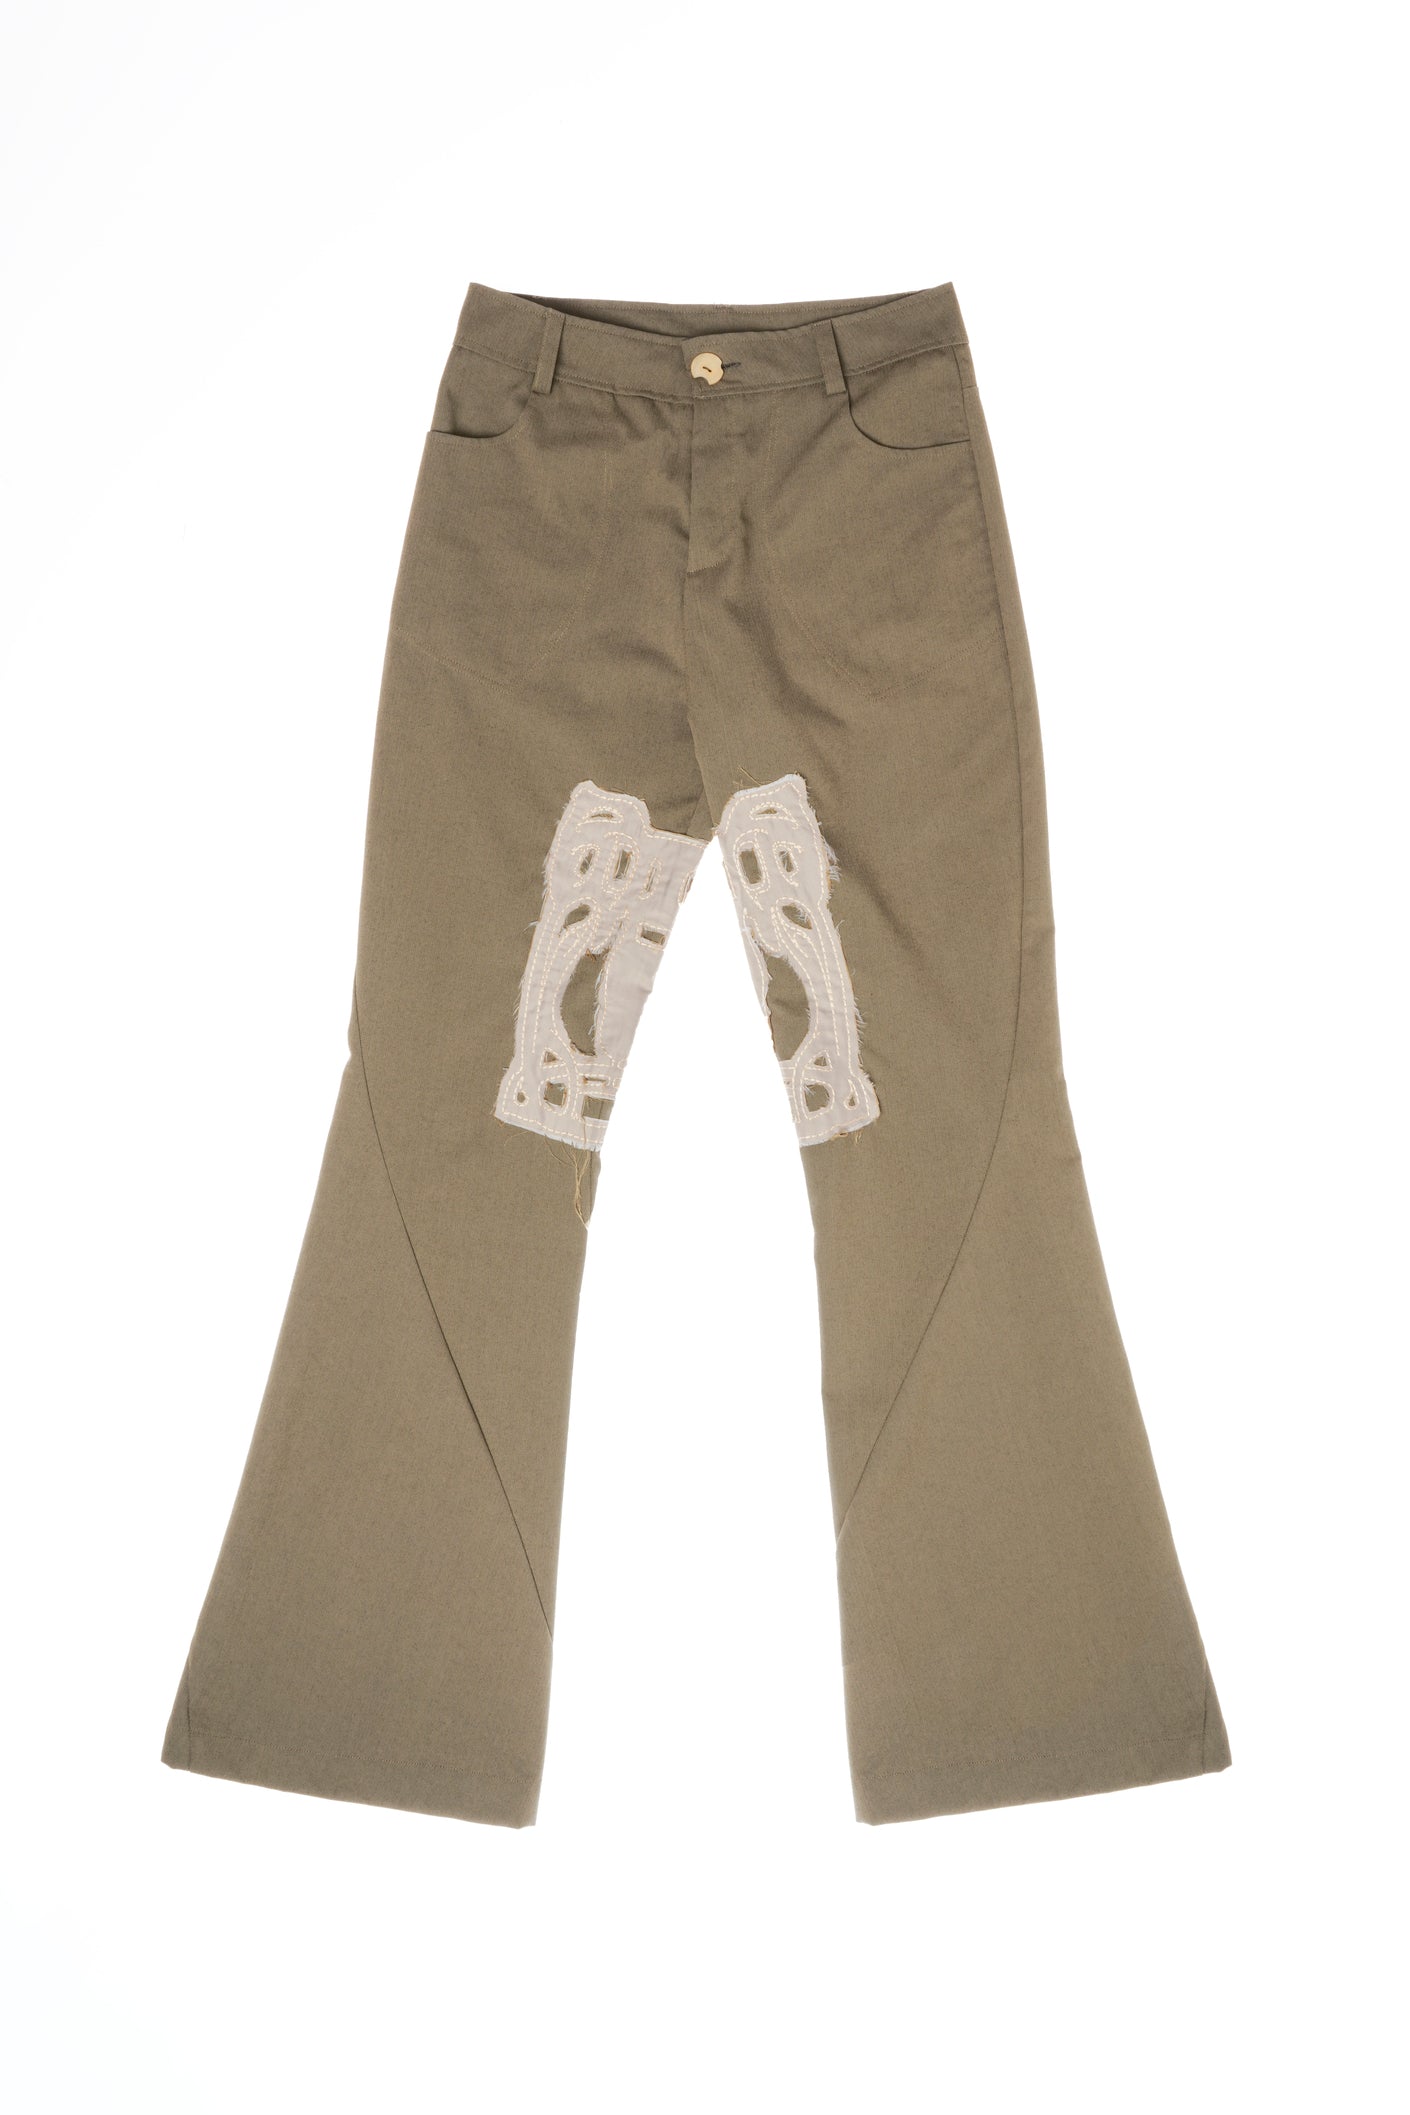 EMBROIDERED TROUSERS (made to order)